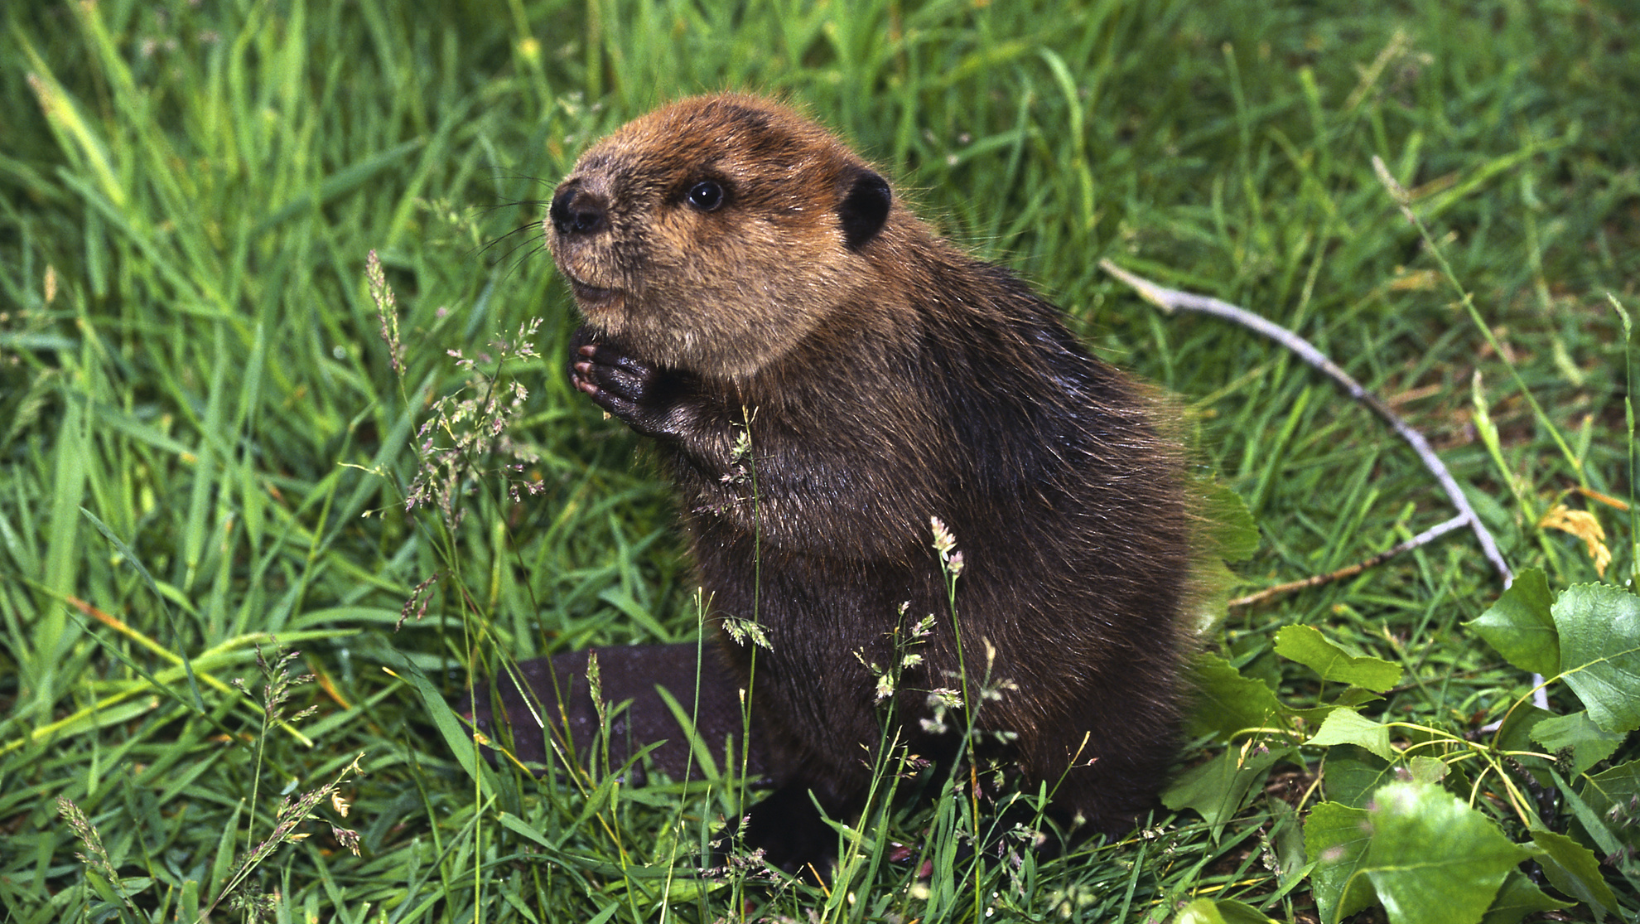 Young American beaver standing in grass. Image Credit: By Hemera Technologies from Photo Images via Canva Pro.